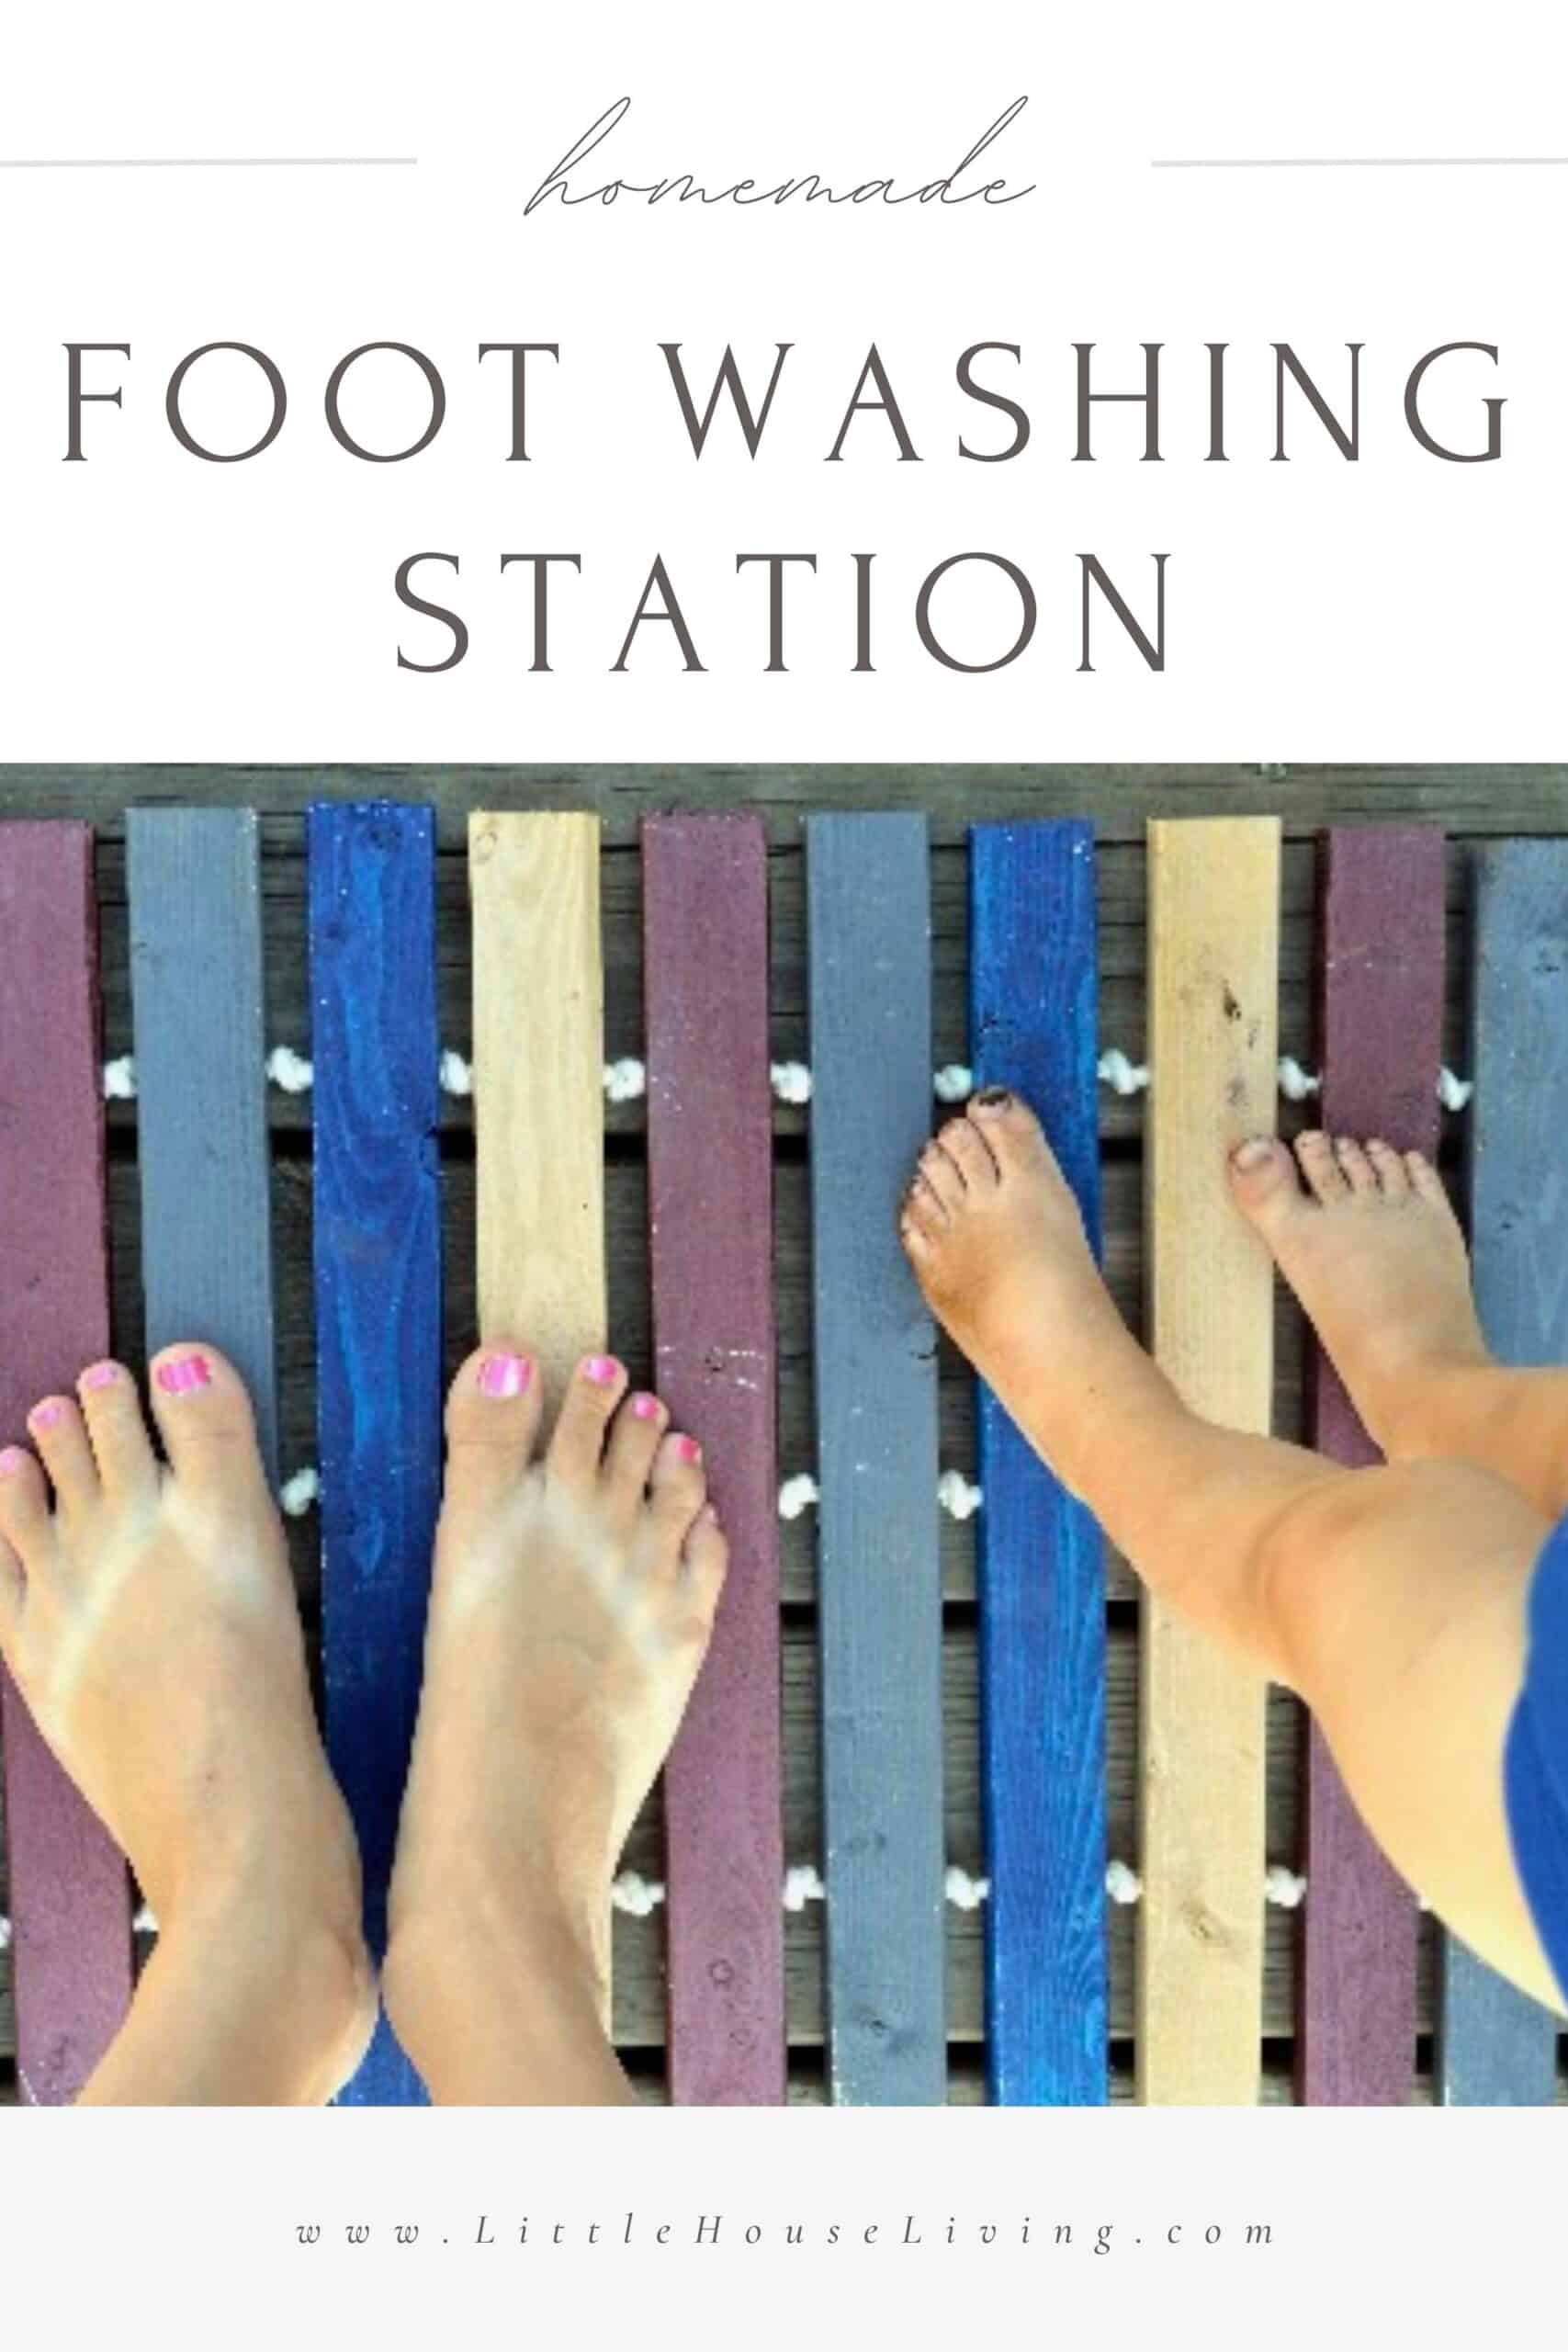 Tired of having to clean up dirty footprints tracked into the house after being outside? Learn how to make an easy and inexpensive Outdoor Foot Washing Station below.